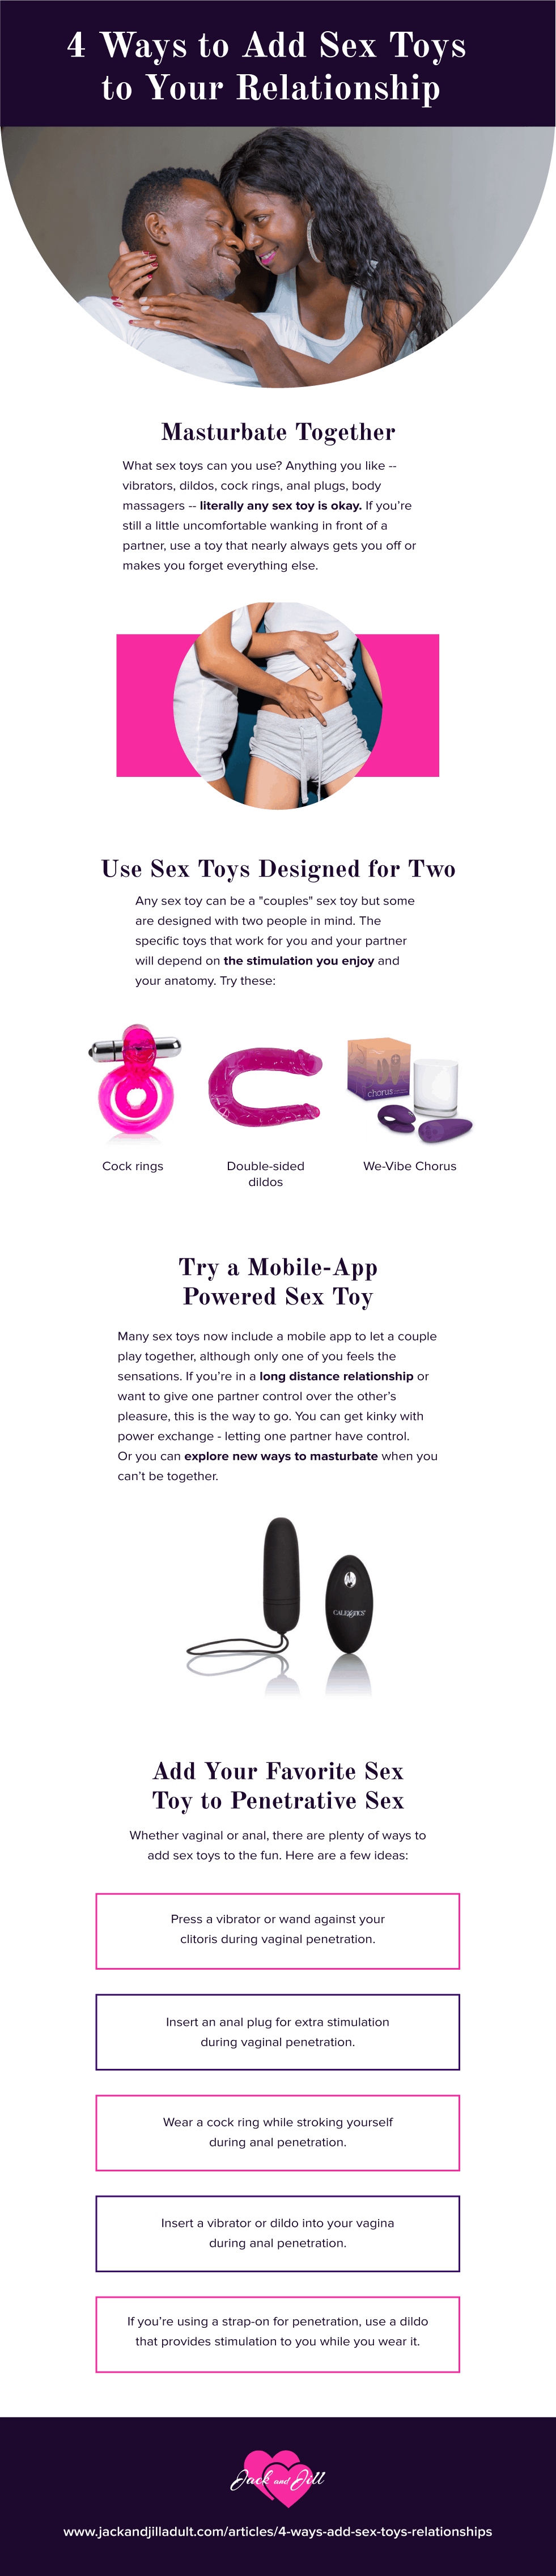 Infographic for 4 Ways to Add Sex Toys to Your Relationship